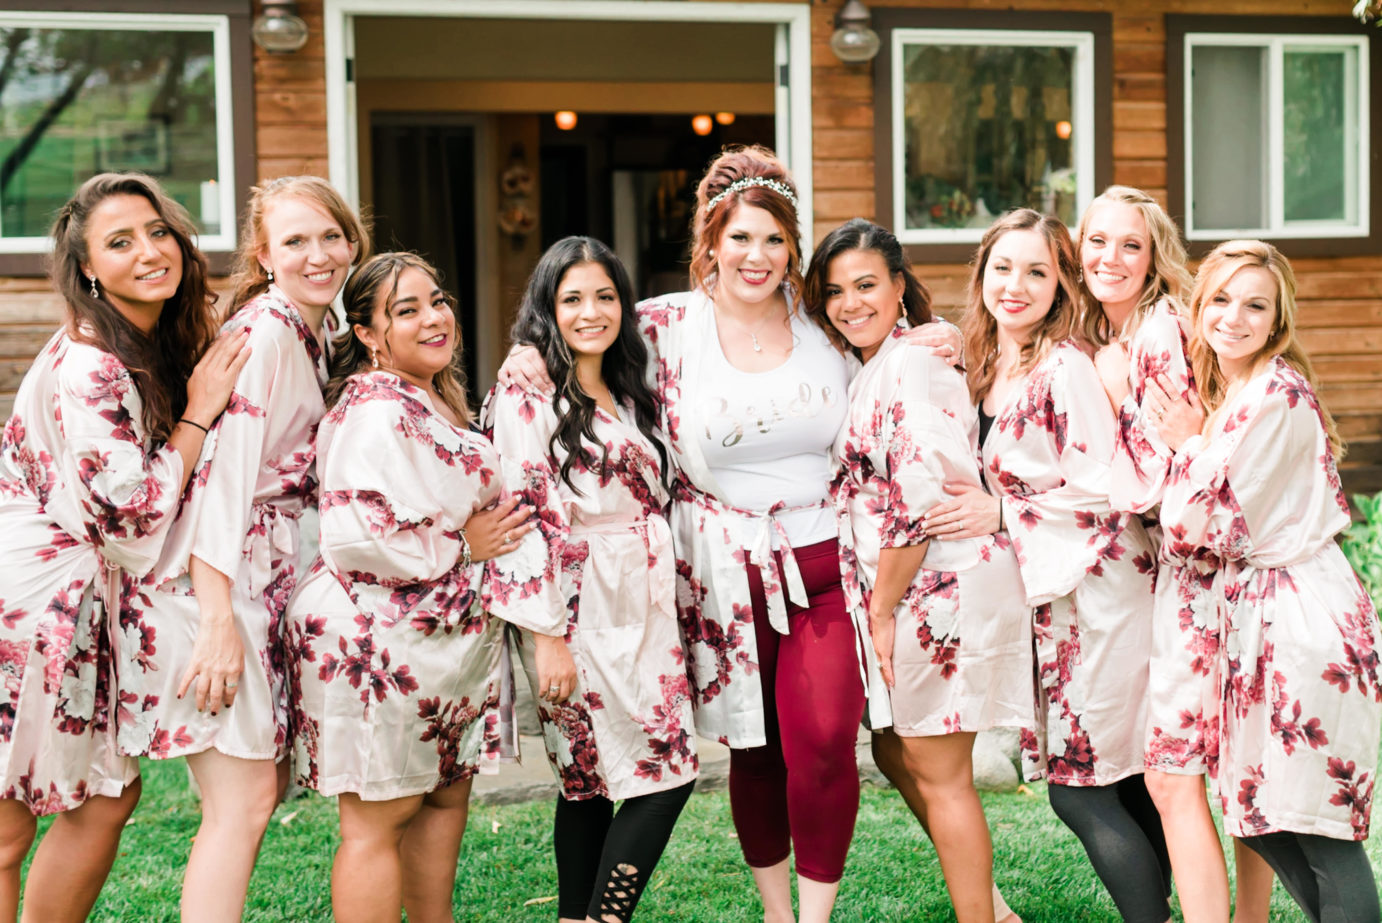 Planning a budget friendly bachelorette party using air bnb